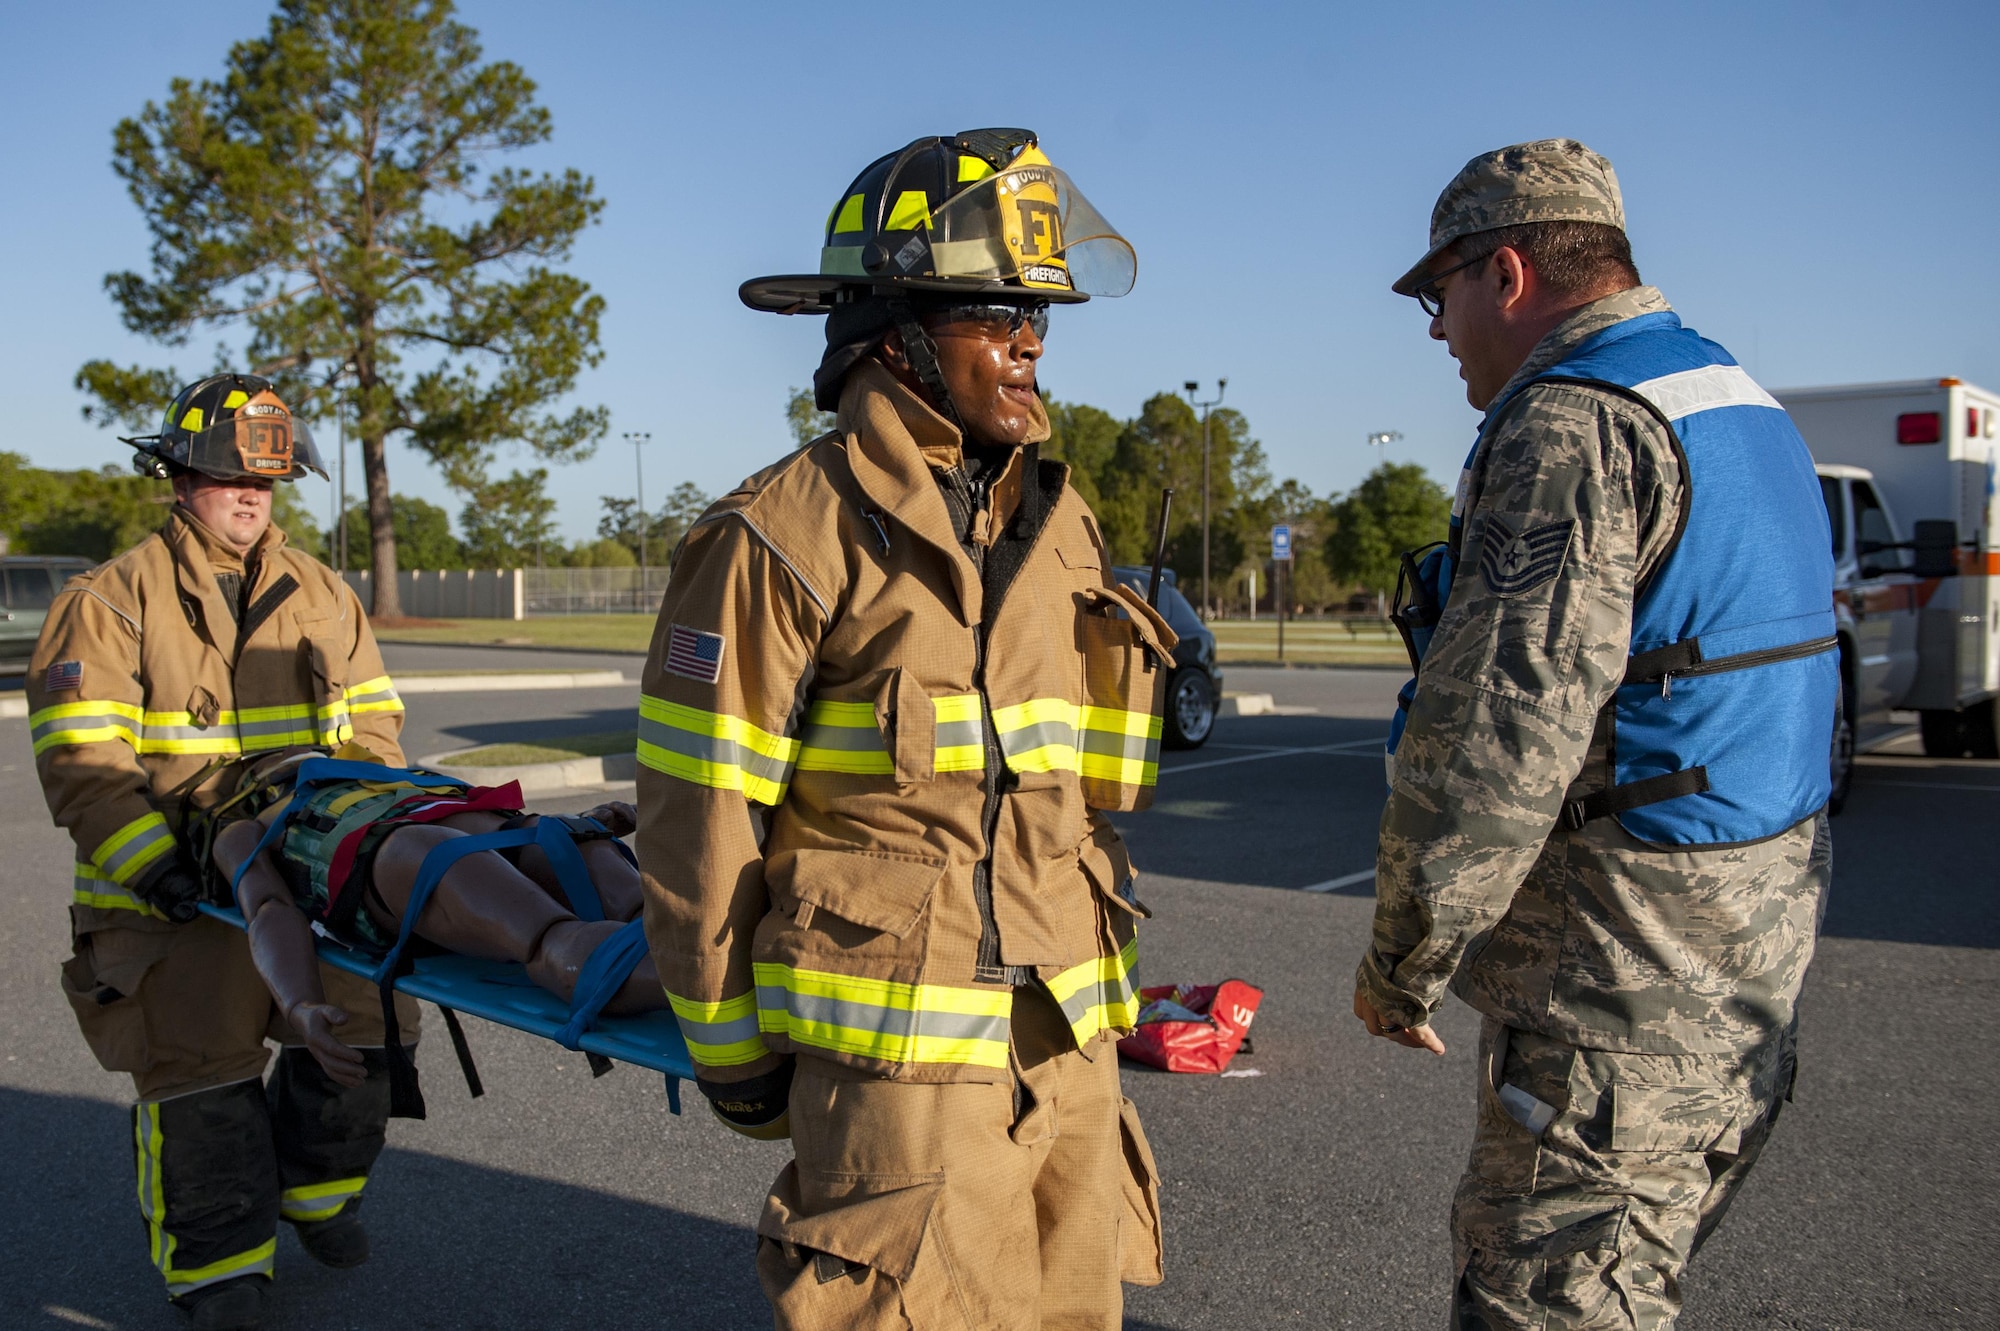 Moody firefighters carry a stimulated victim to a triage site during a natural disaster exercise, April 19, 2017, at Moody Air Force Base, Ga. The exercise tested the wing’s ability to evacuate aircraft, secure assets and respond to emergency situations in the event of a real-world natural disaster. (U.S. Air Force photo by Airman 1st Class Lauren M. Sprunk)